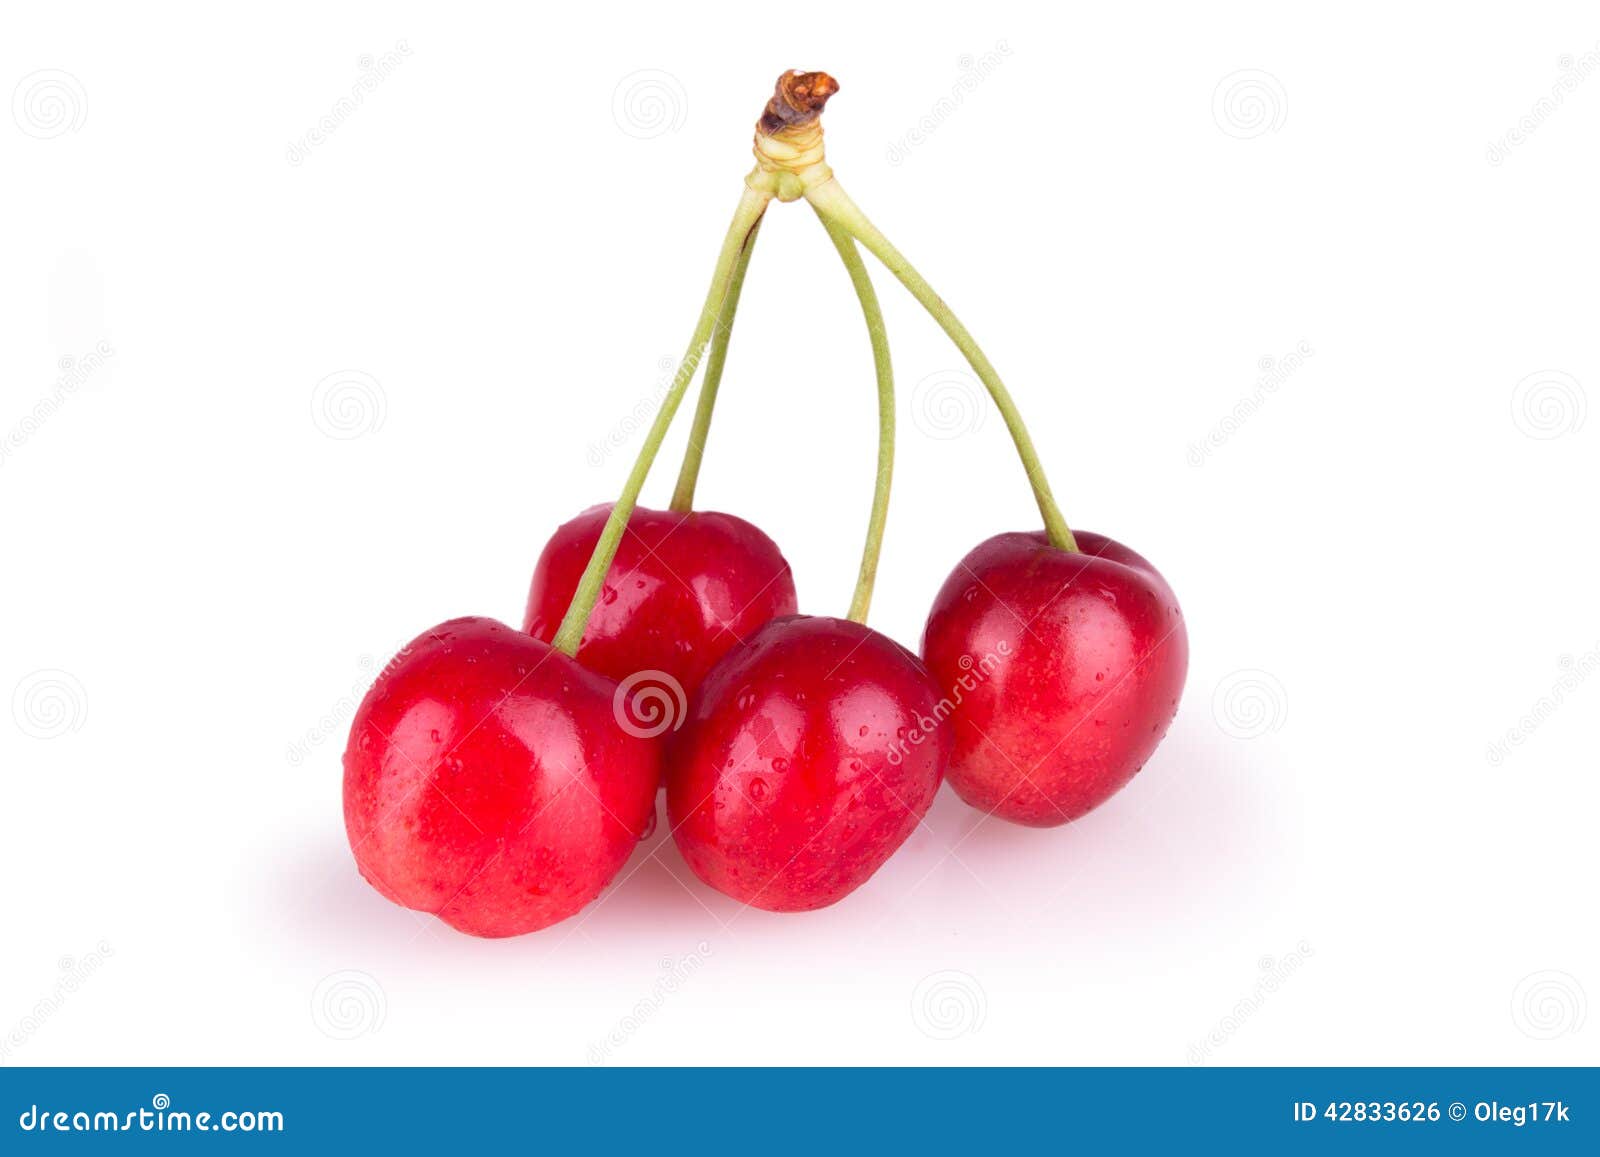 Four ripe red cherries stock photo. Image of diet, color - 42833626